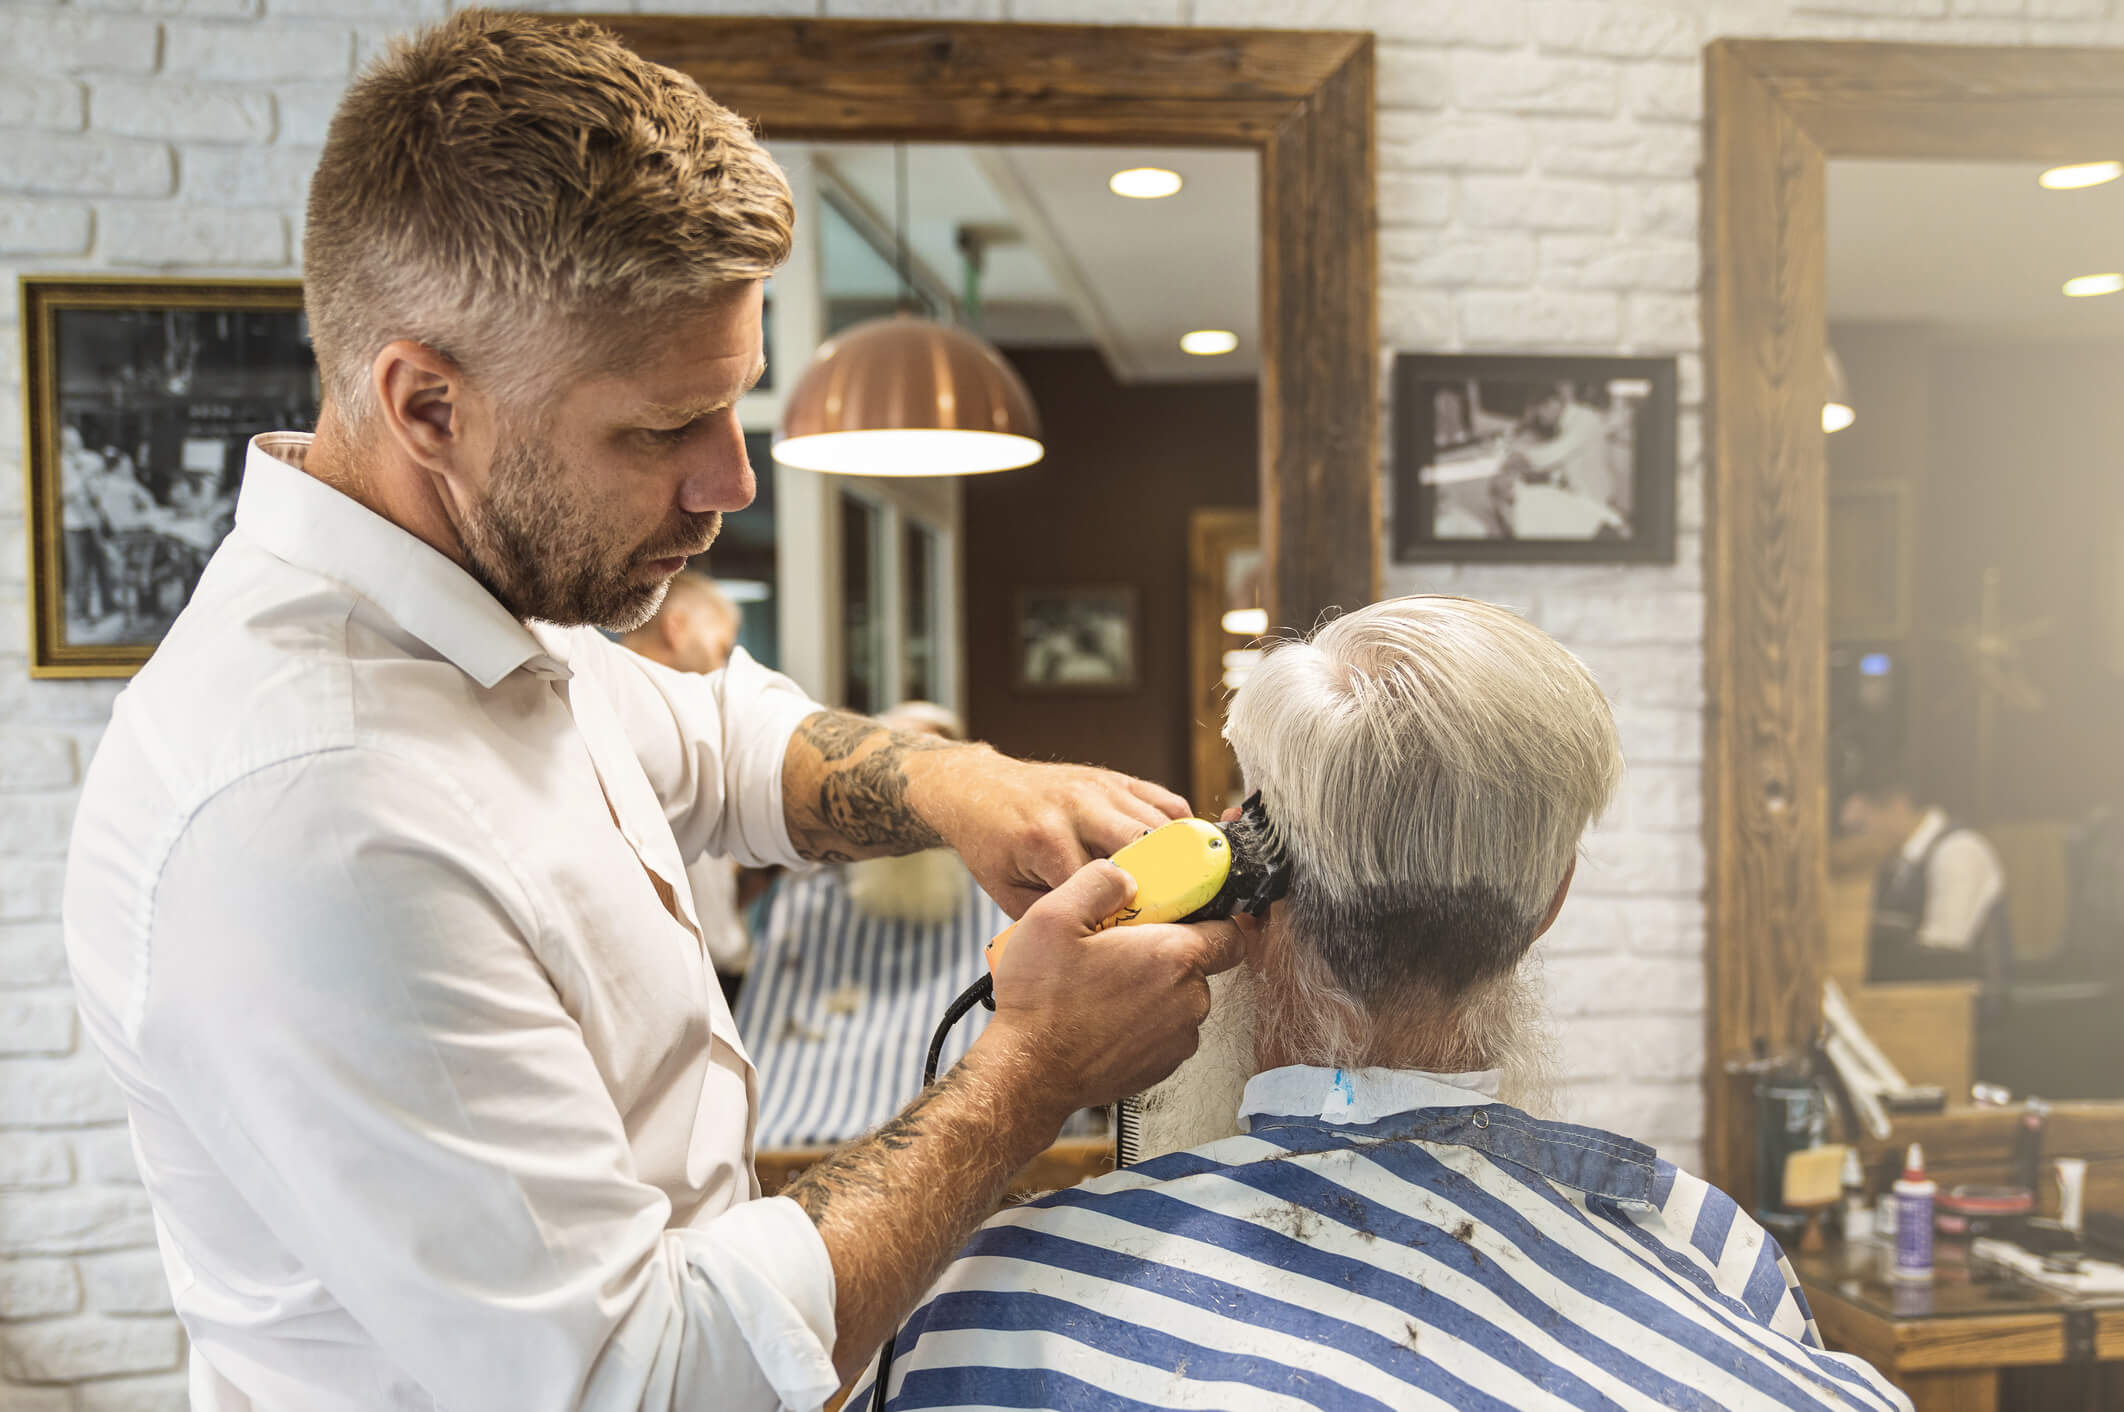 Hairdresser making stylish haircut for a man with grey hair in the barbershop